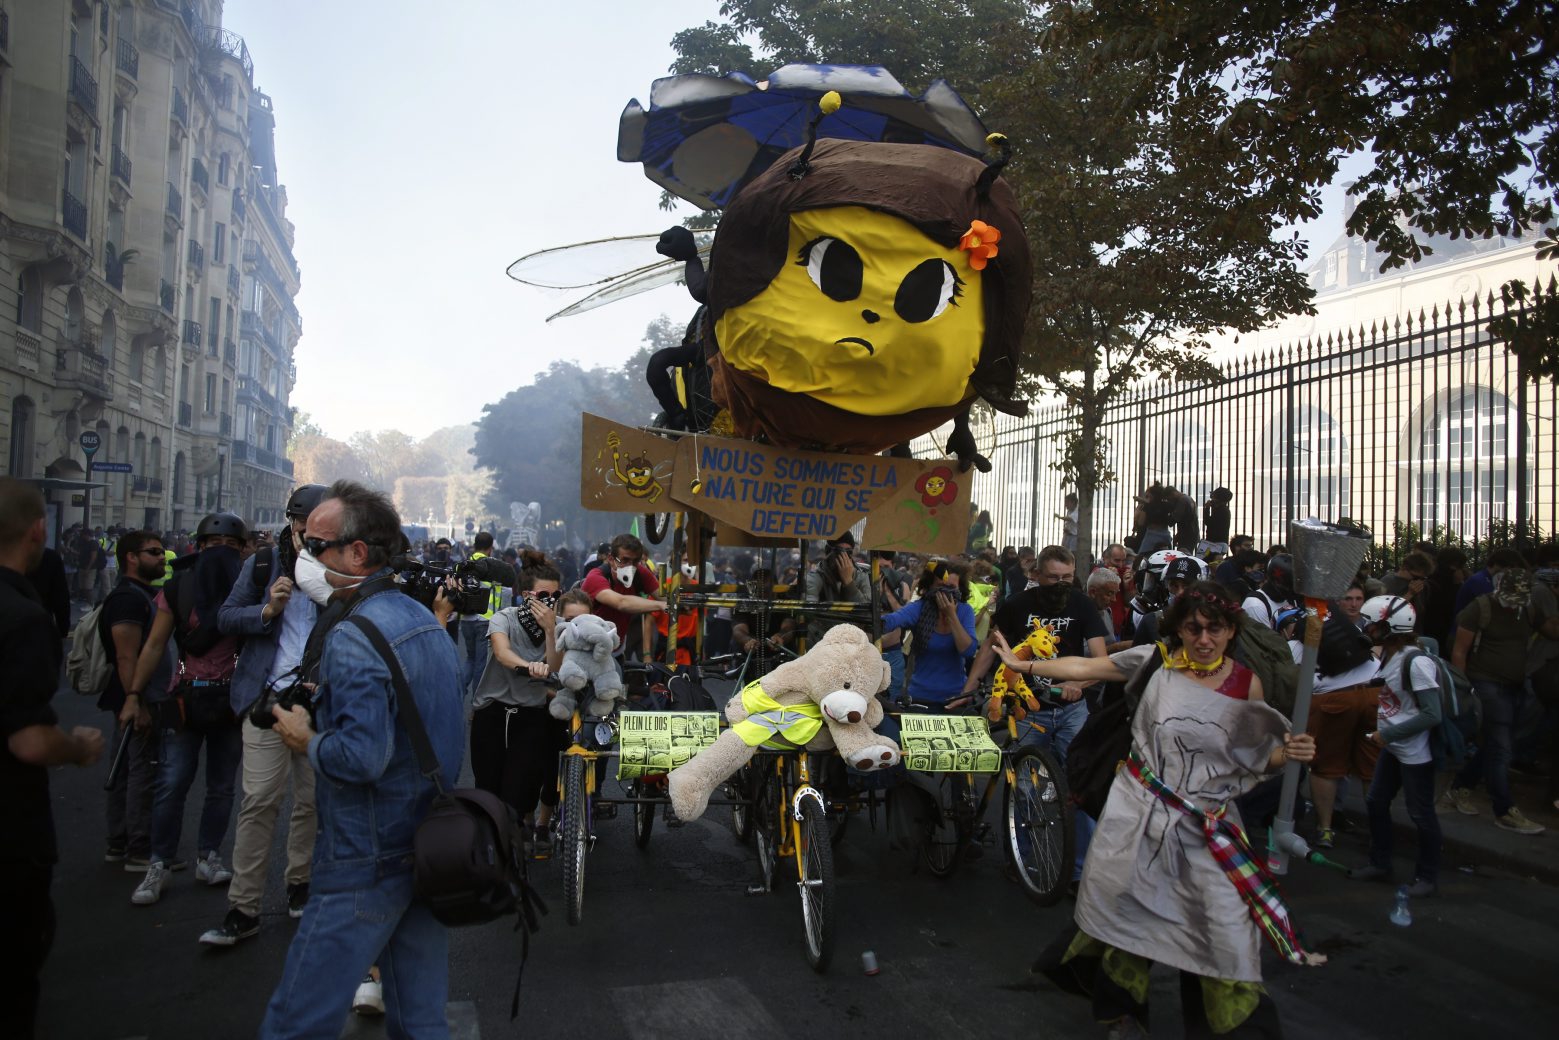 Protestors push a float with a giant bee on it during a climate demonstration, in Paris, Saturday, Sept. 21, 2019. Scuffles broke out in Paris between some violent activists and police which responded with tear gas at a march for climate gathering thousands of people in Paris. (AP Photo/Thibault Camus) France Climate Protests